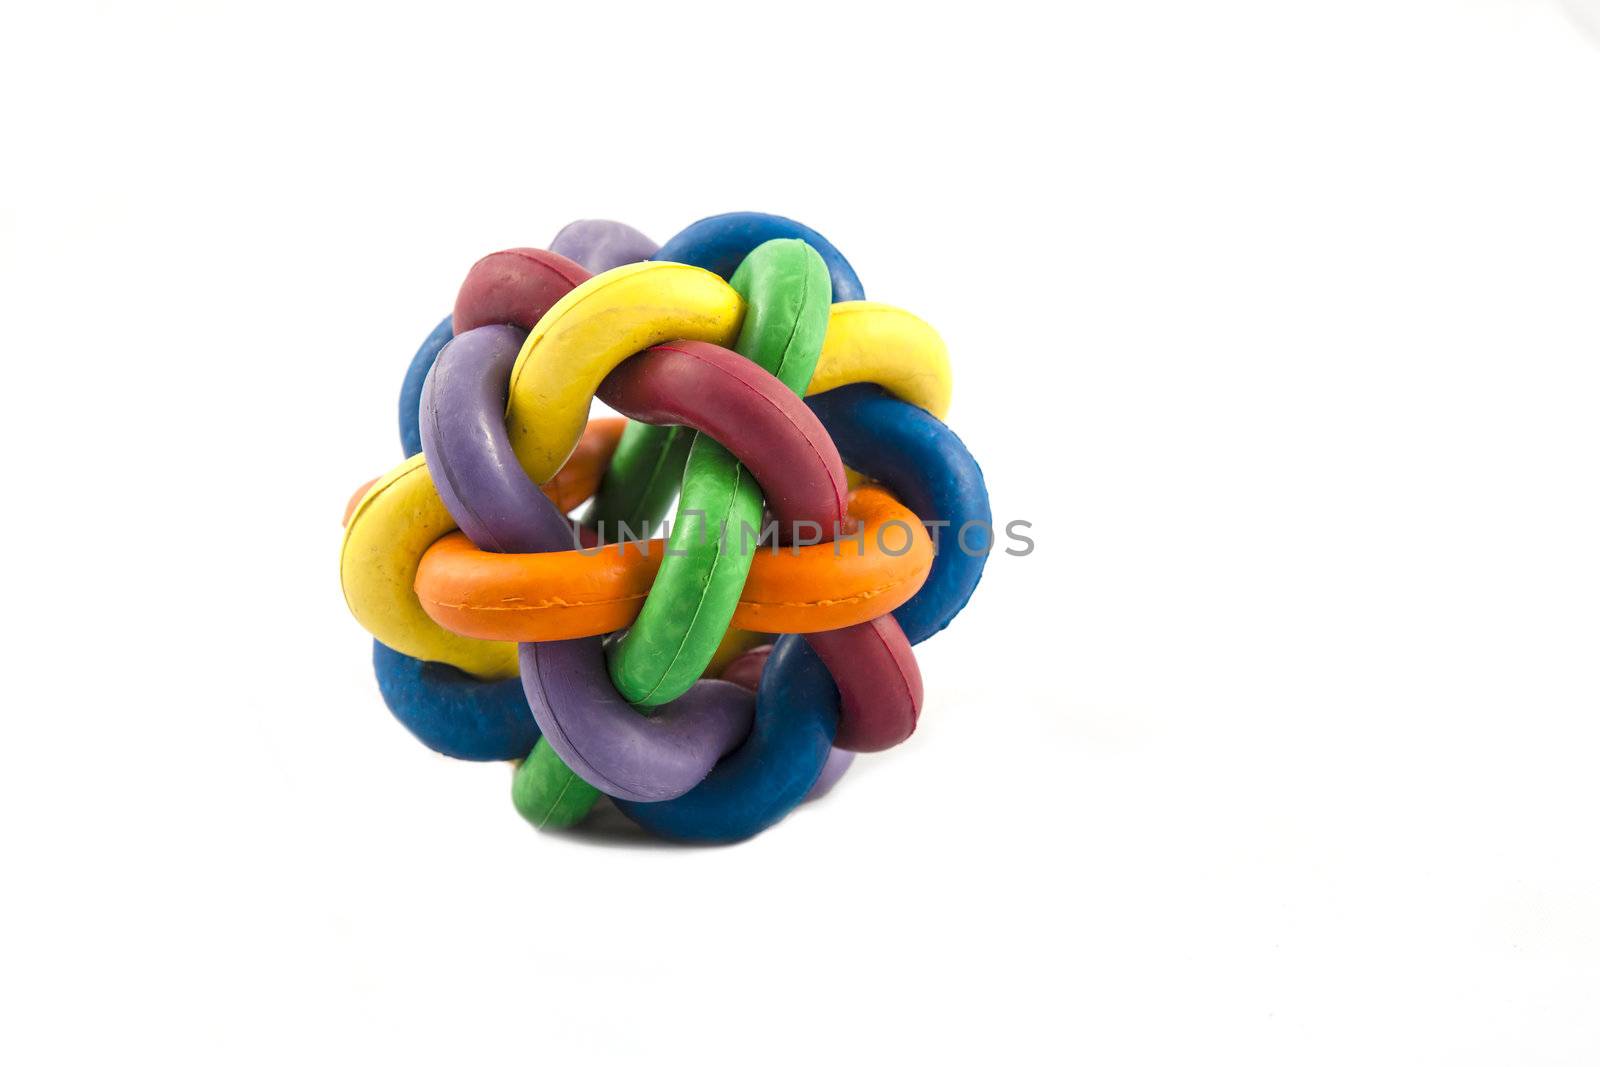 A multi coloured rubber ball dog toy